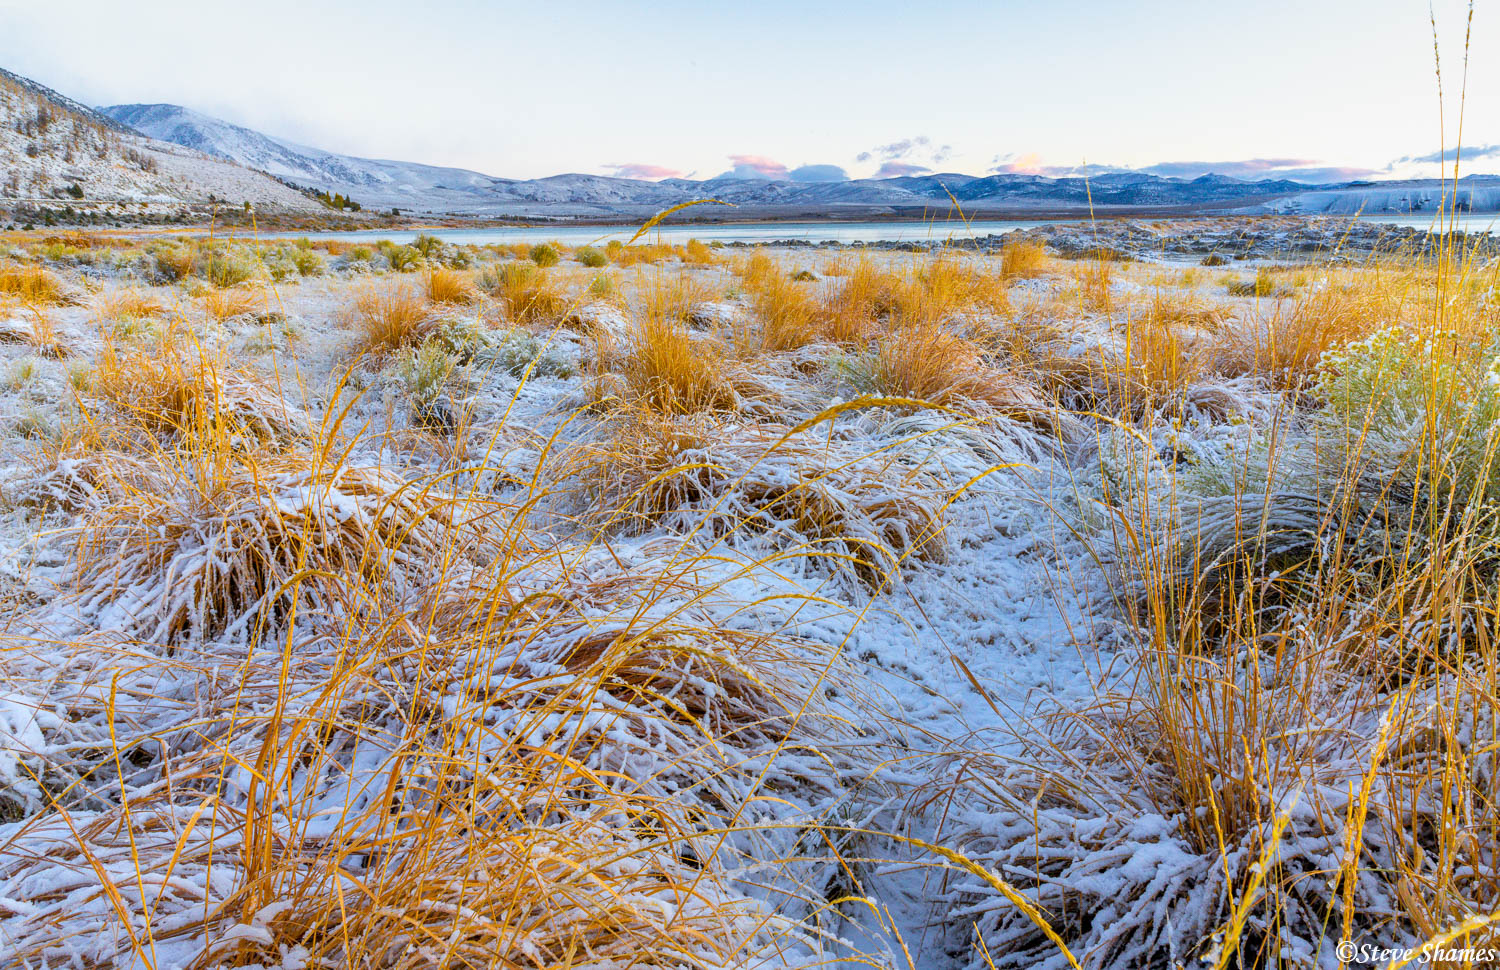 I stayed in the little town of Lee Vining, and it was great to wake up to fresh snow! I immediately went out to Mono Lake for...